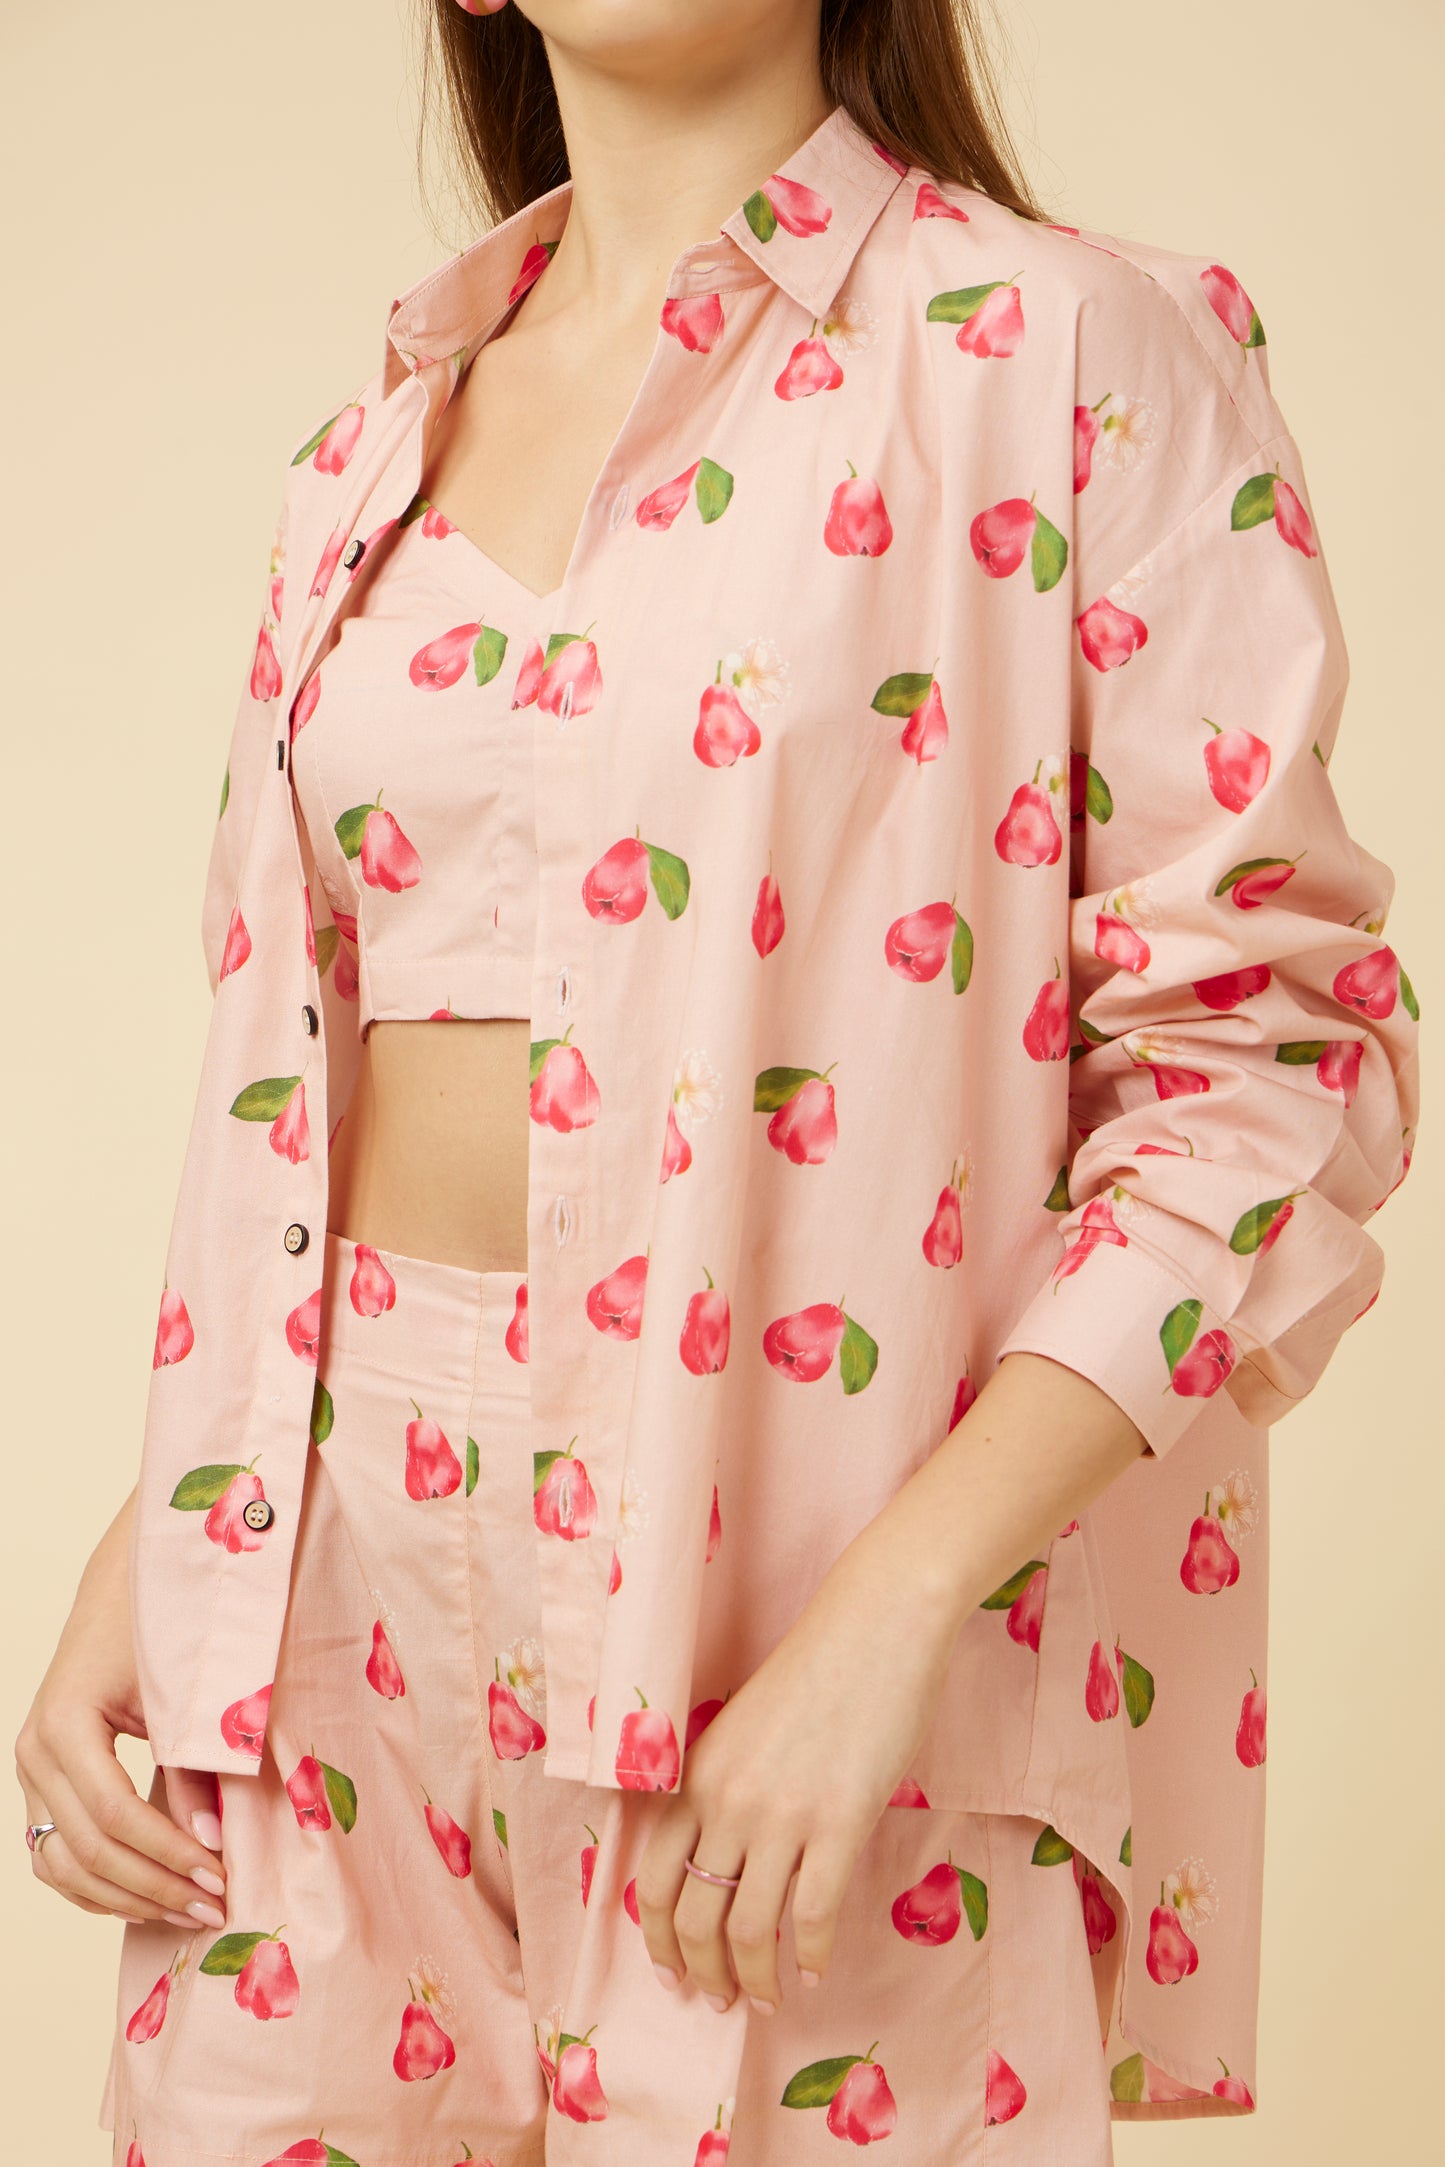 Close-up of a woman wearing the Rose Apple full-sleeve shirt, showing the detailed rose print and the chic square neckline